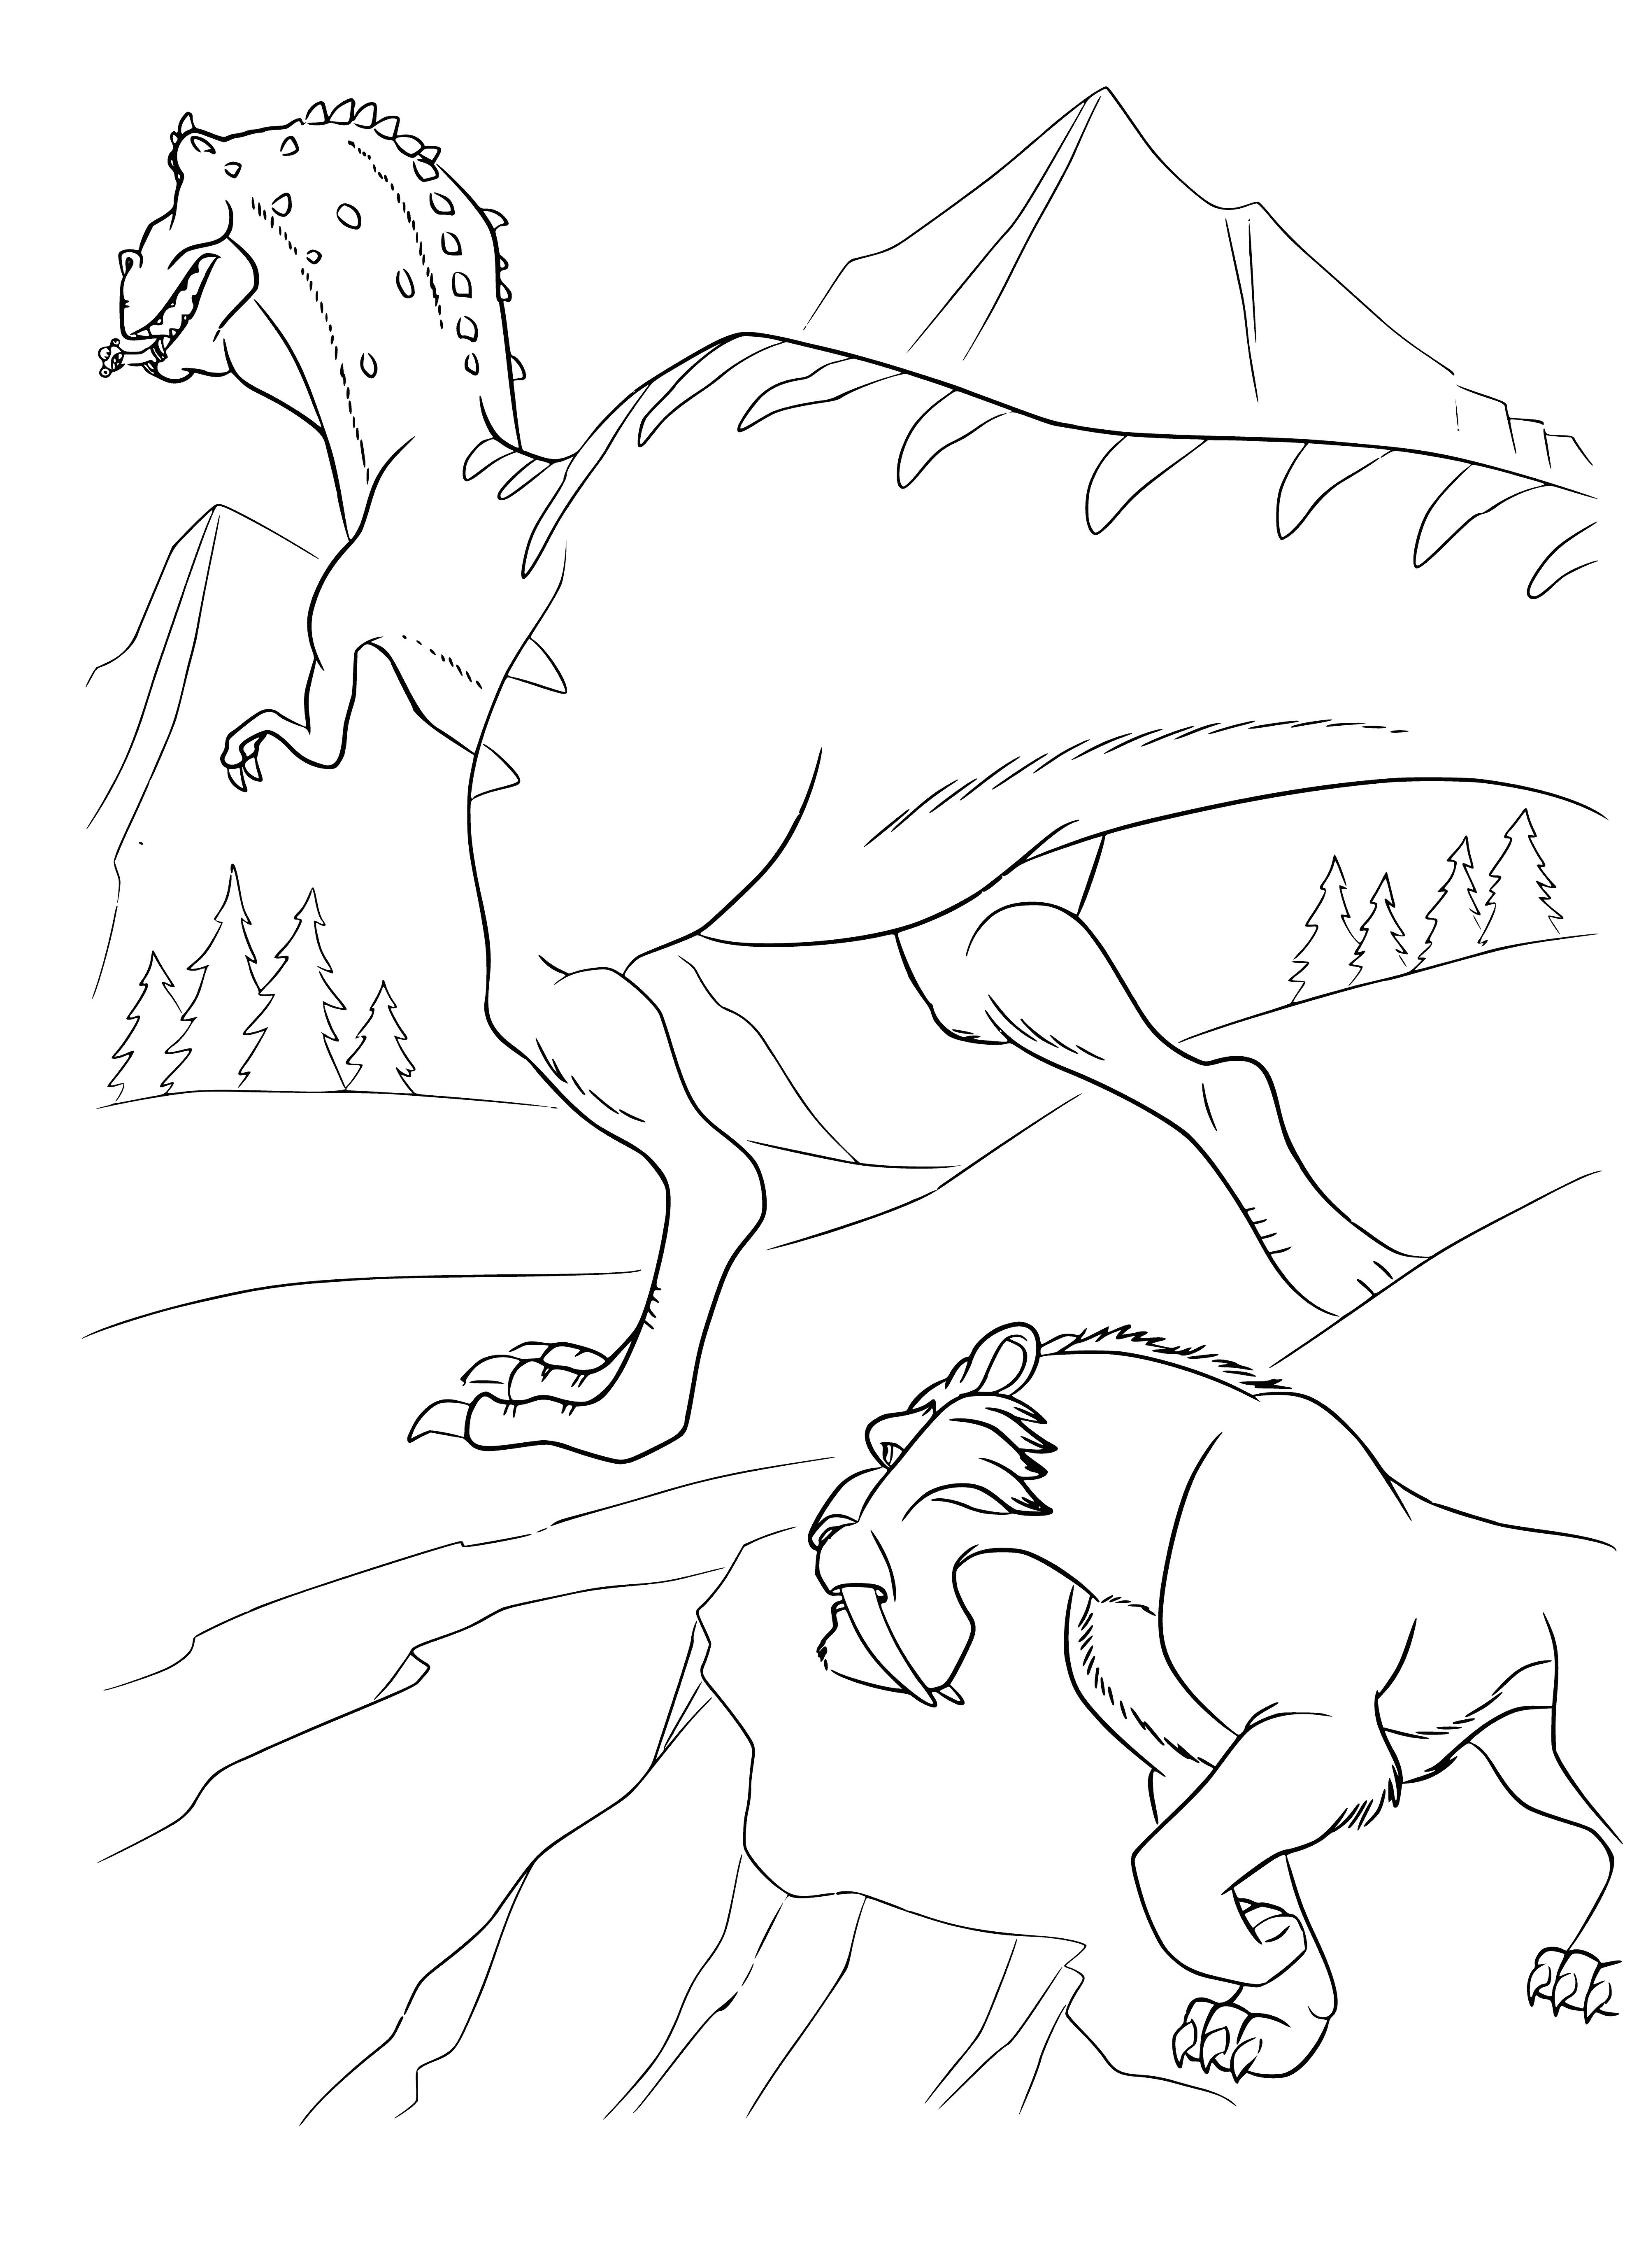 Tiger Diego coloring page